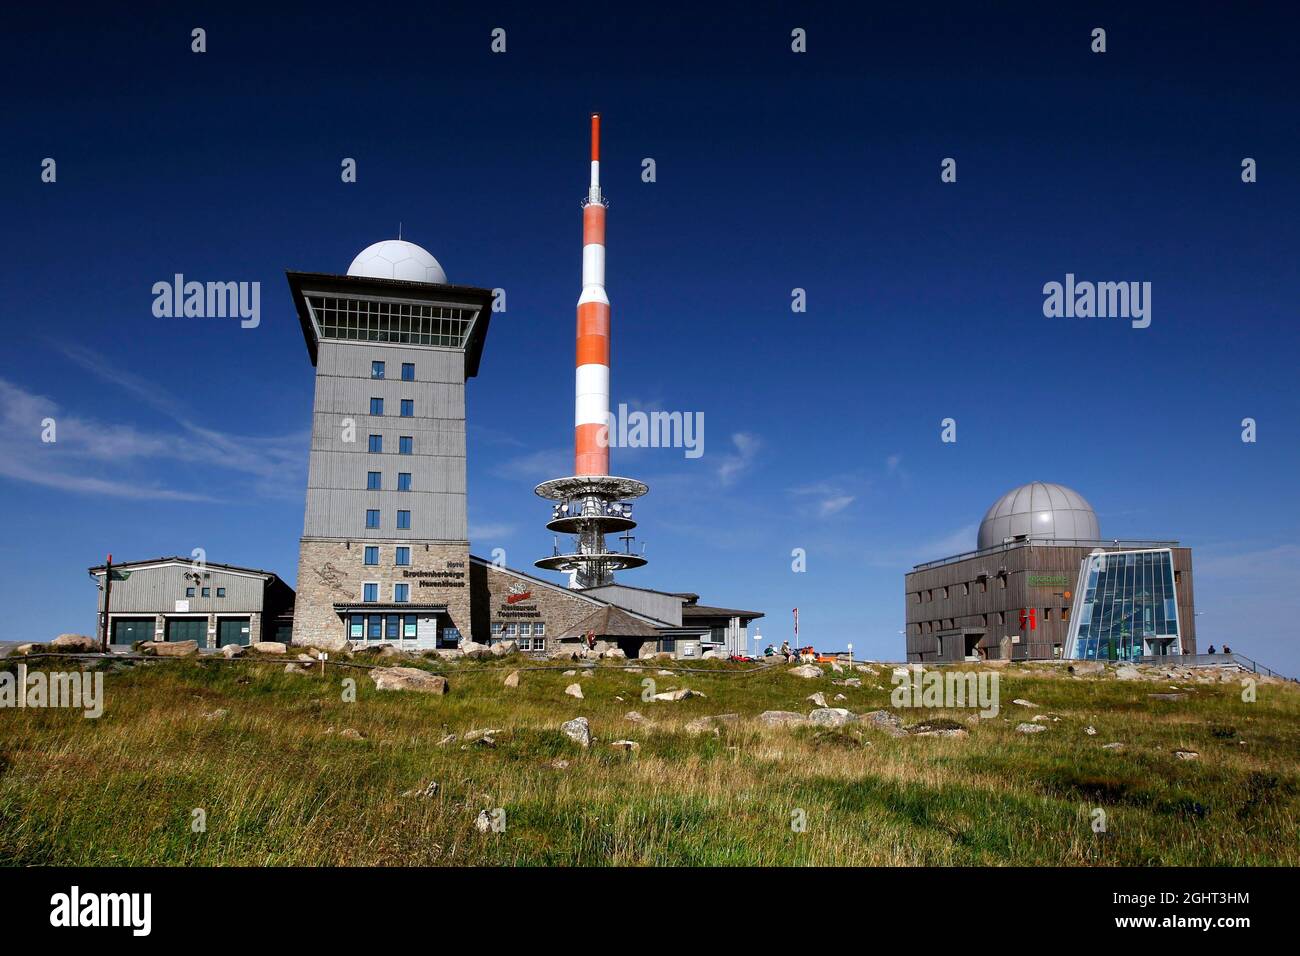 Radio Antenna Military High Resolution Stock Photography and Images - Alamy